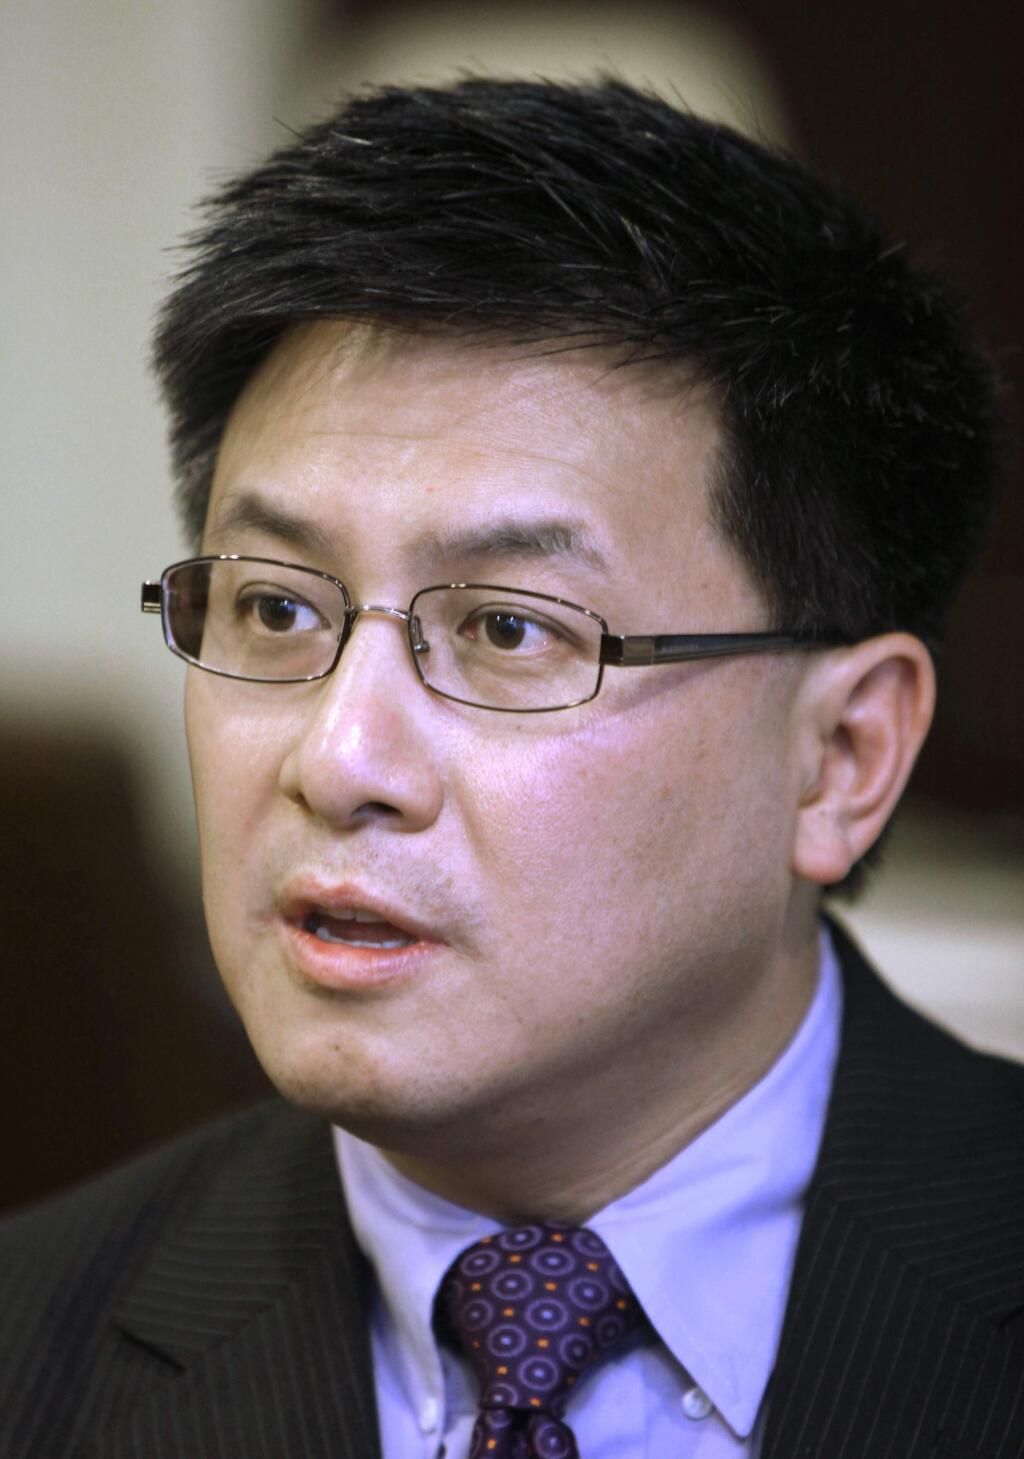 FILE - This June 21, 2011 file photo shows California Controller John Chiang during an interview with the Associated Press in Sacramento, Calif. State Treasurer Chiang announced Tuesday, May 17, 2016, that he's formed a campaign committee and will begin raising money to run for governor in 2018. Chiang, a Democrat, is the son of immigrants from Taiwan and would become California's first Asian governor. (AP Photo/Rich Pedroncelli, File)